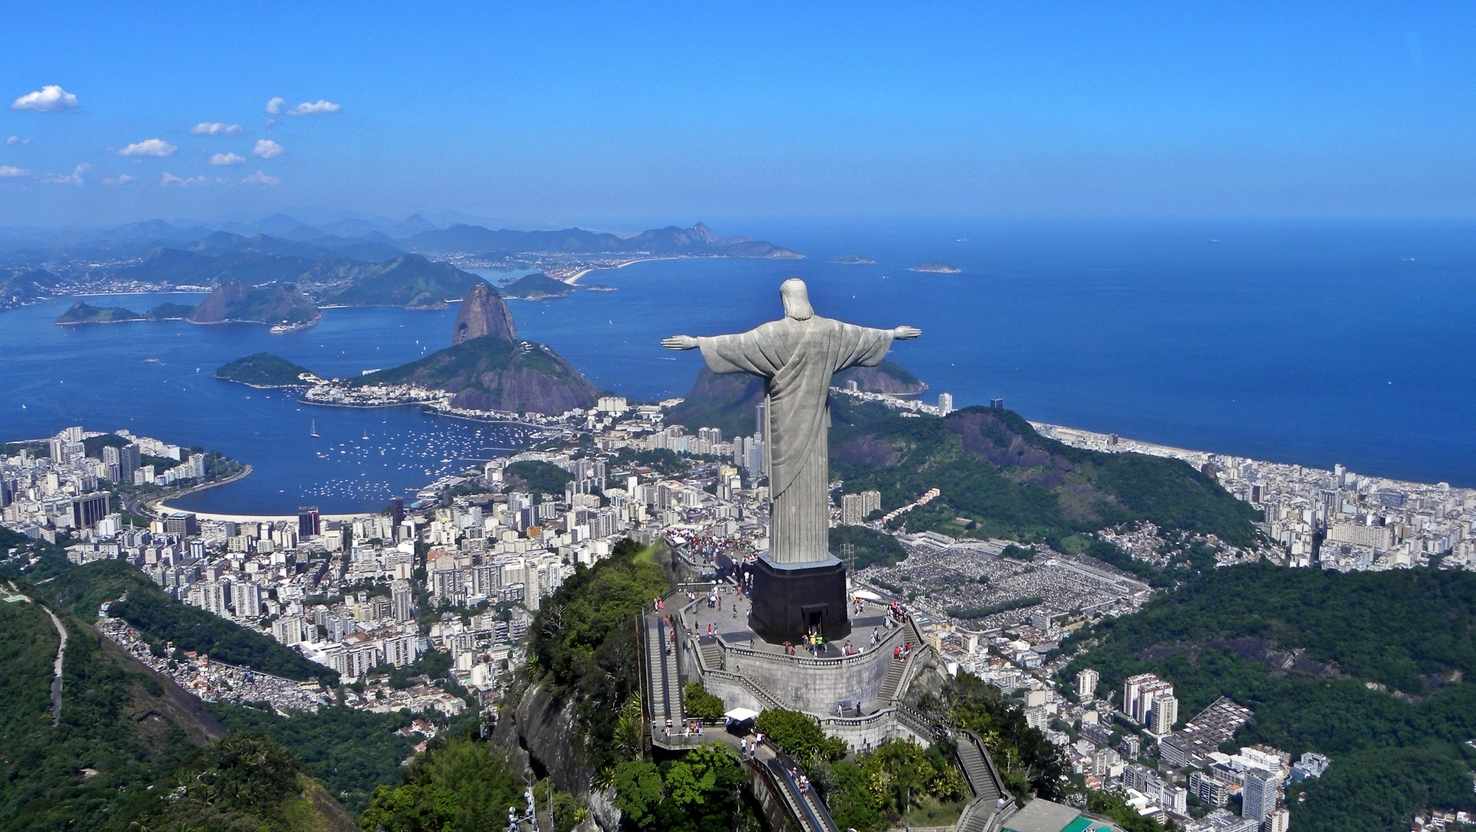 Large christ on corcovado mountain